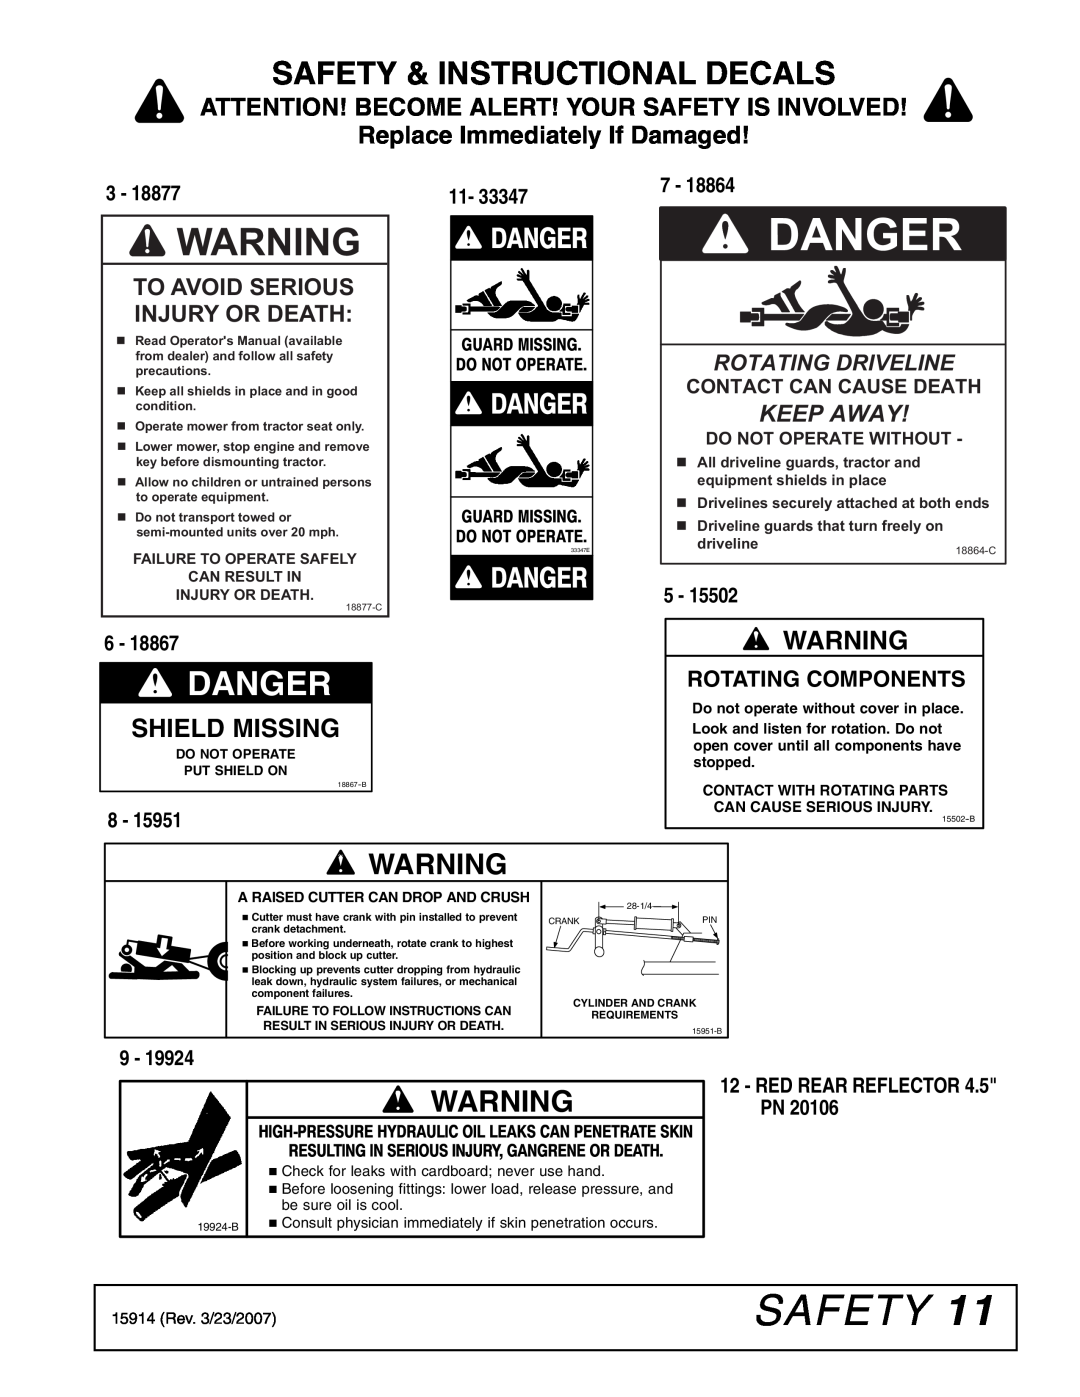 Woods Equipment D80-2 Danger, Safety & Instructional Decals, 33347E, Attention! Become Alert! Your Safety Is Involved 